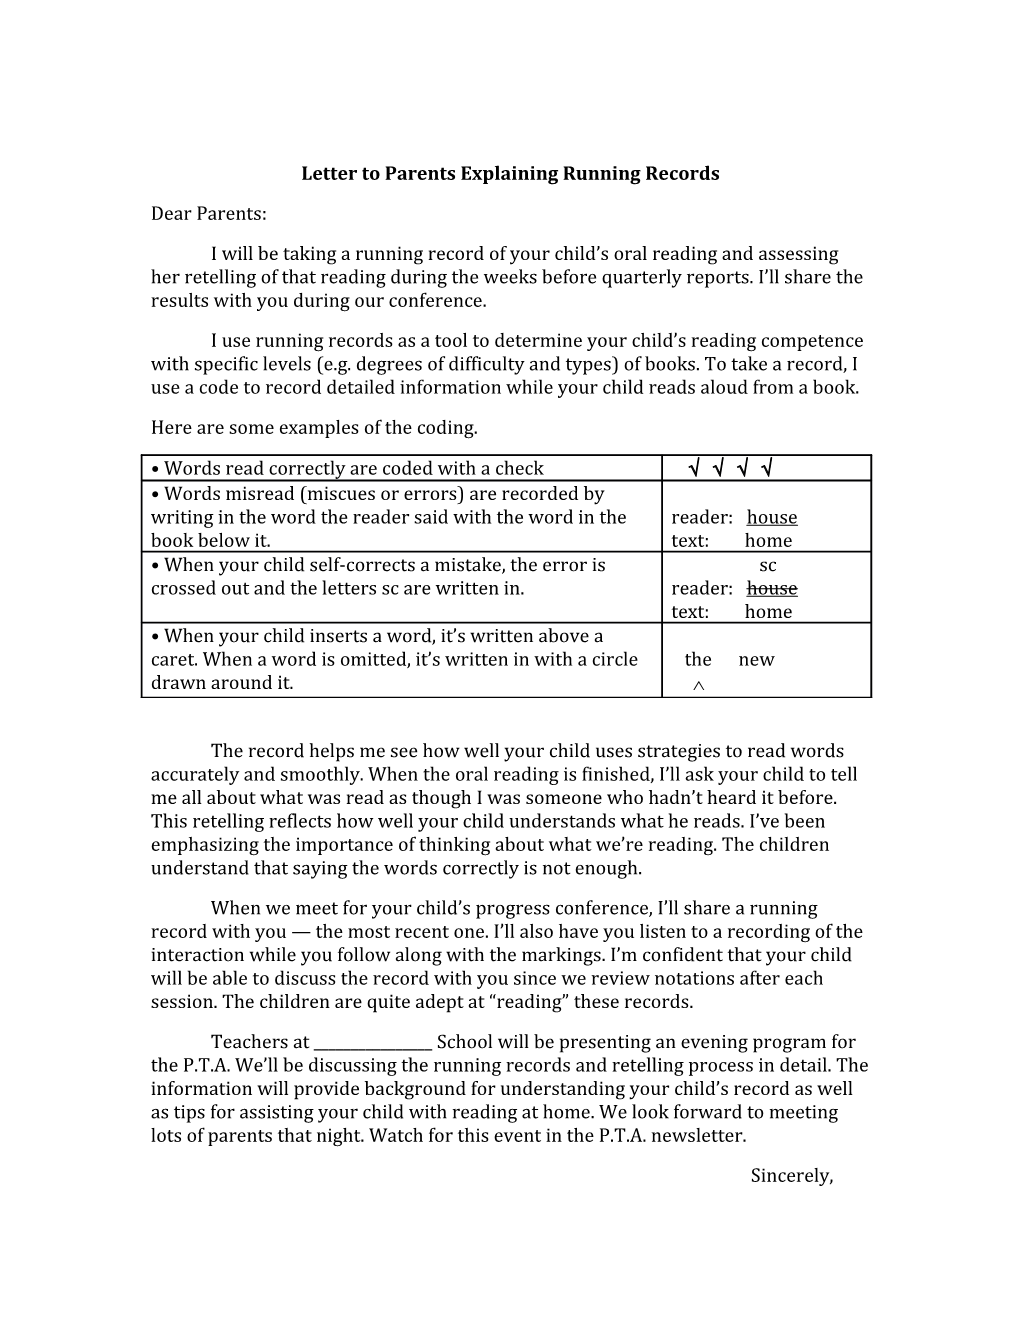 Letter to Parents Explaining Running Records